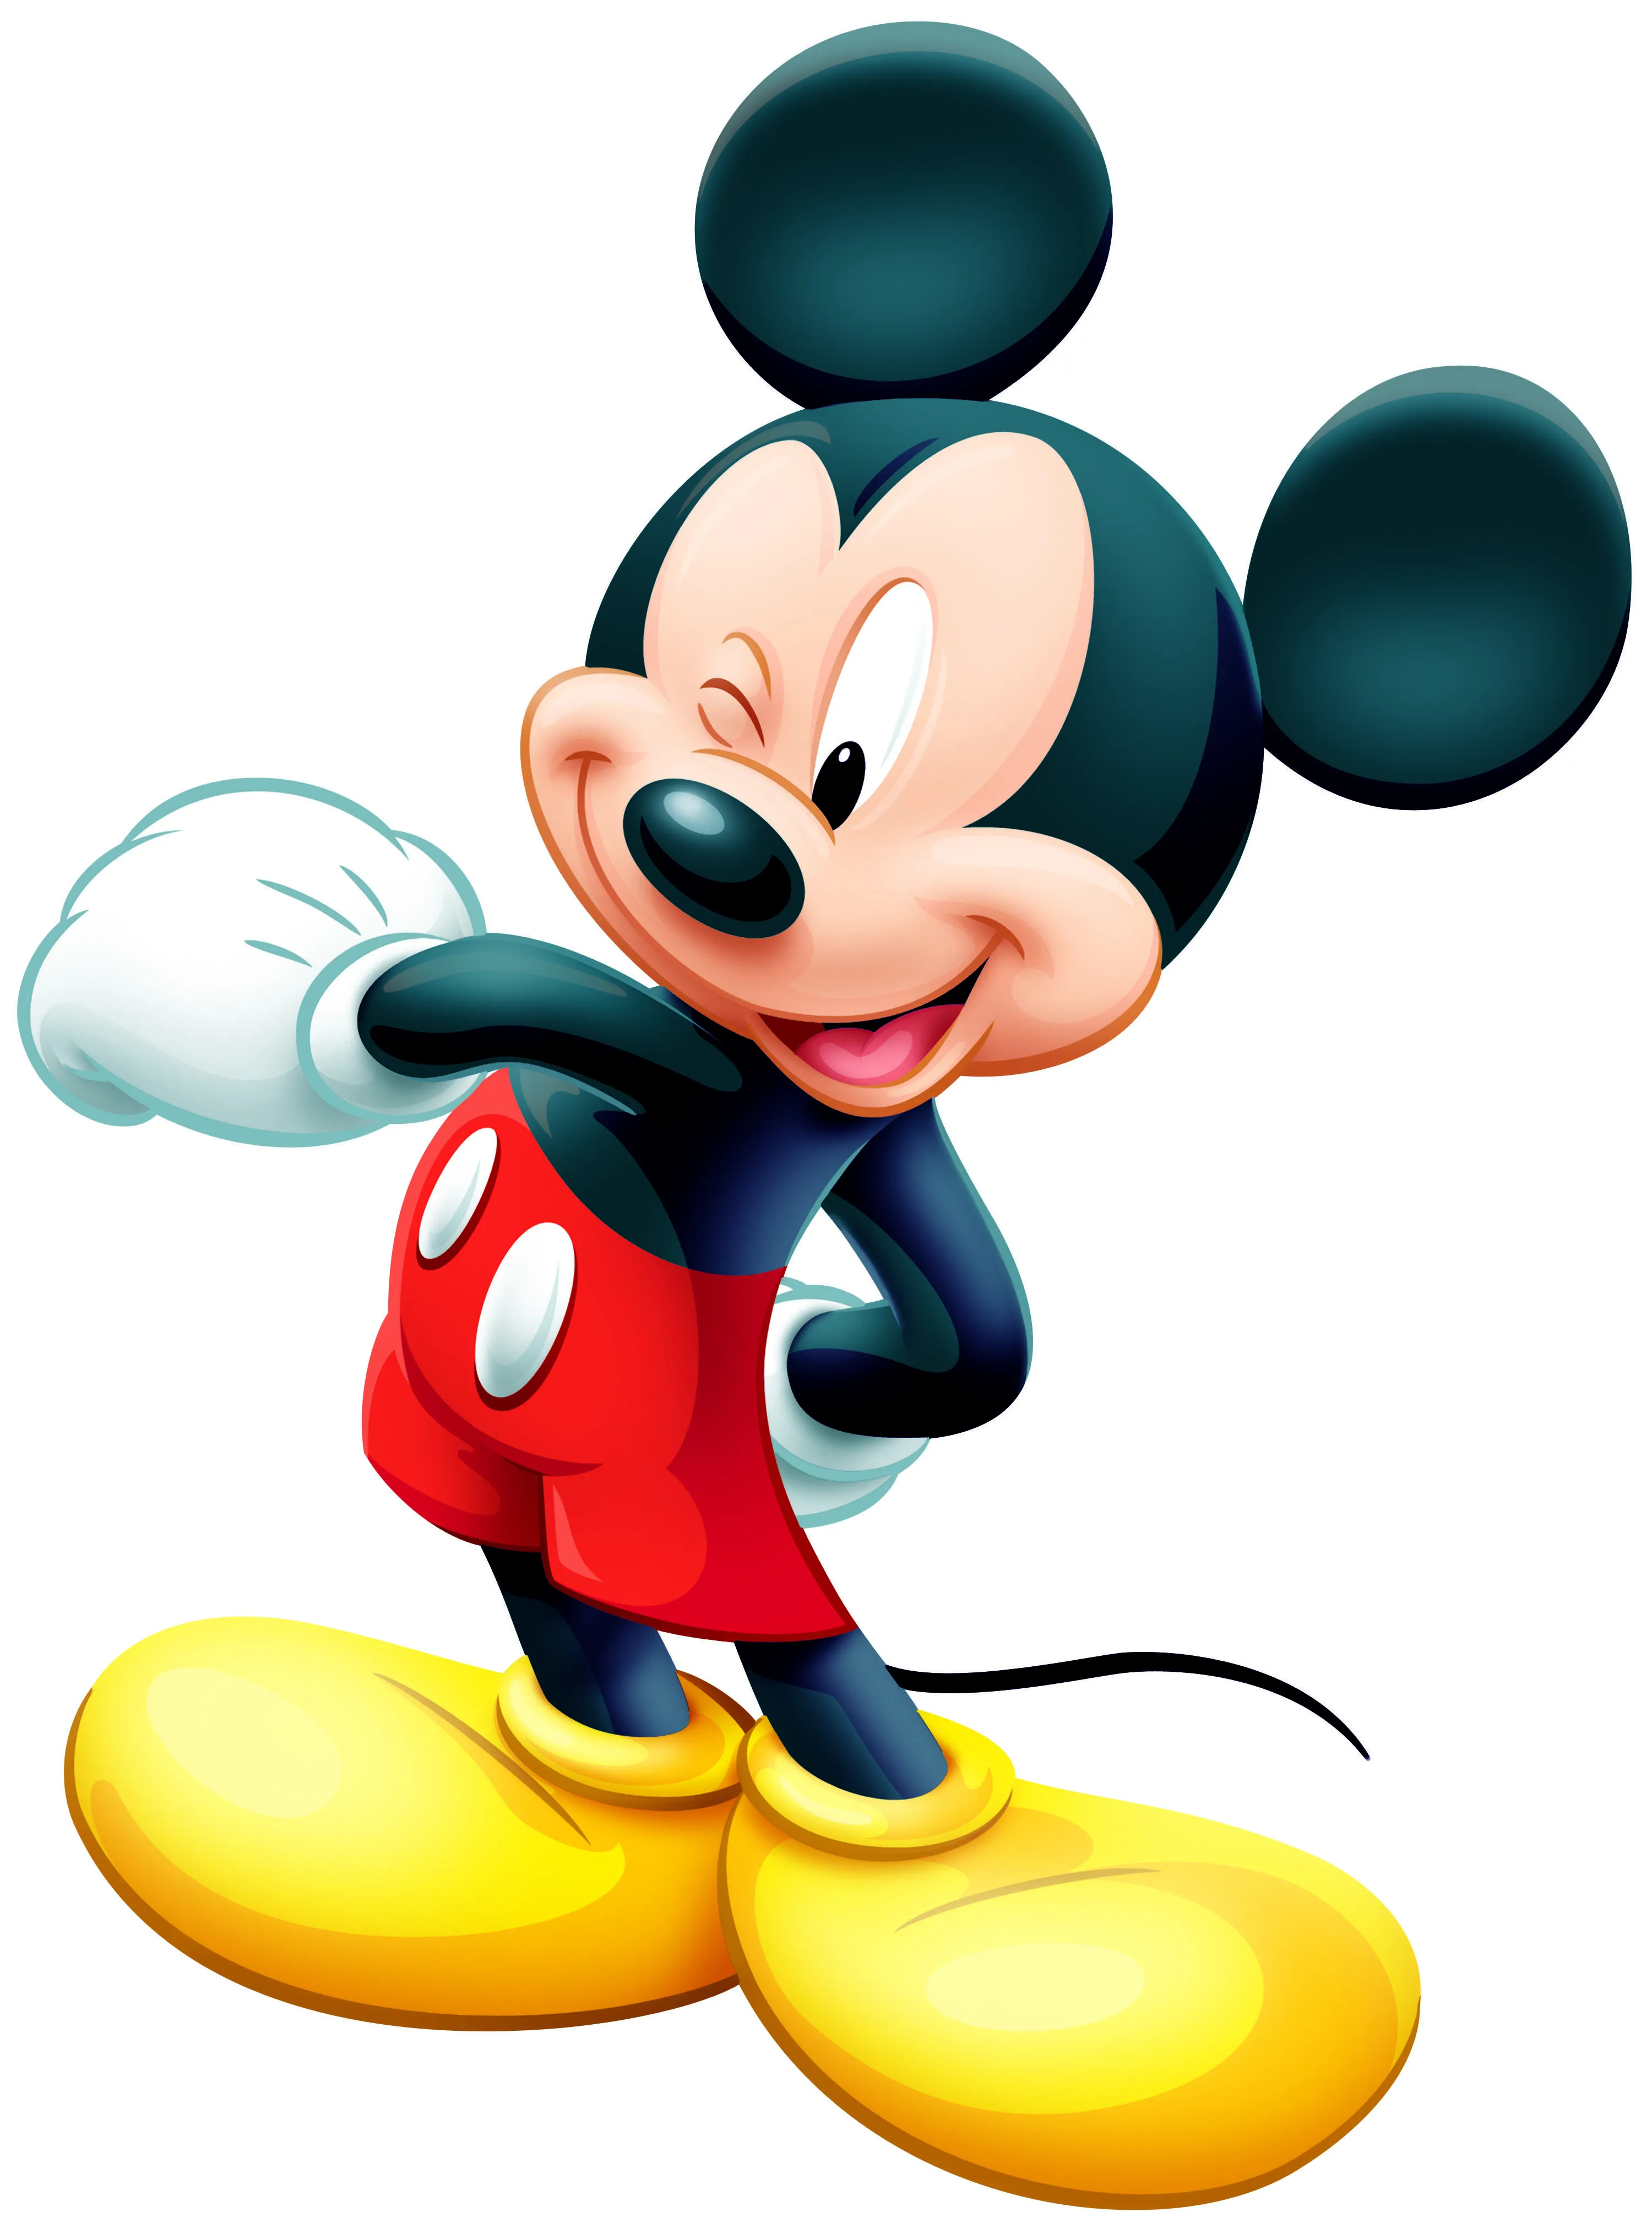 Baby Mickey Mouse Sleeping | Clipart Panda - Free Clipart Images